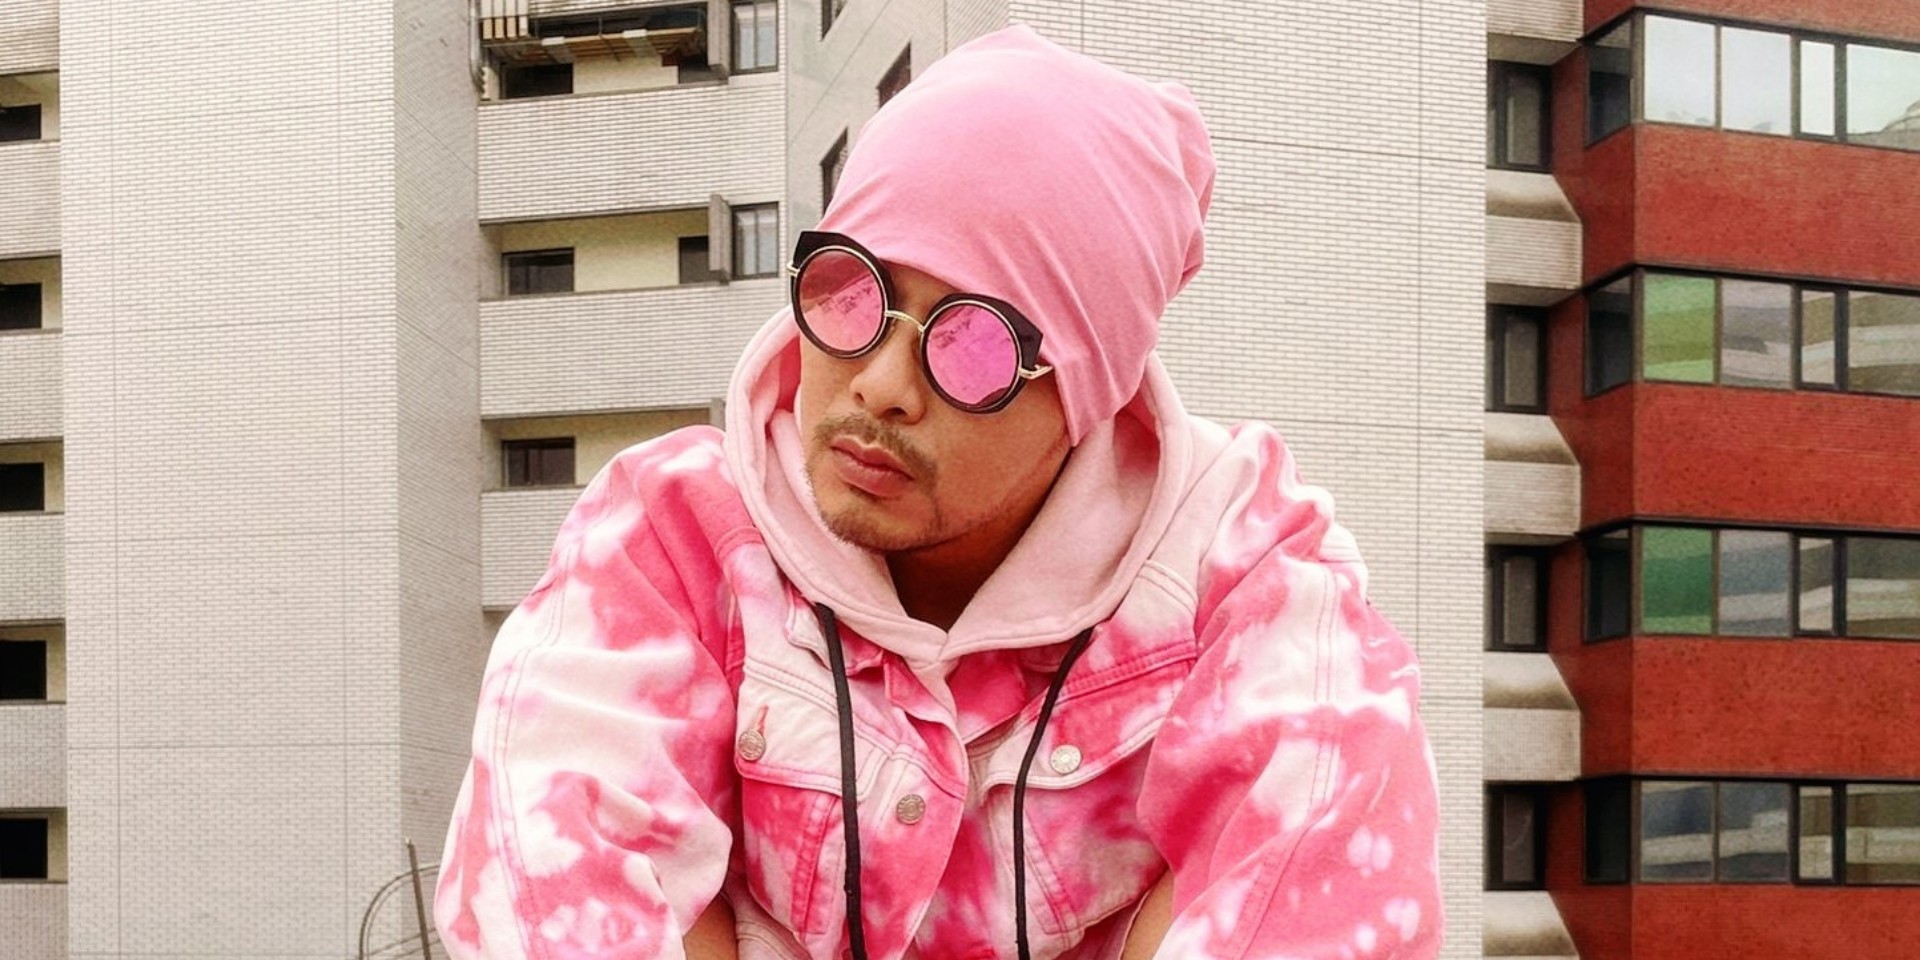 Malaysian rapper Namewee's song 'Fragile' sold as NFT for RM 4 million